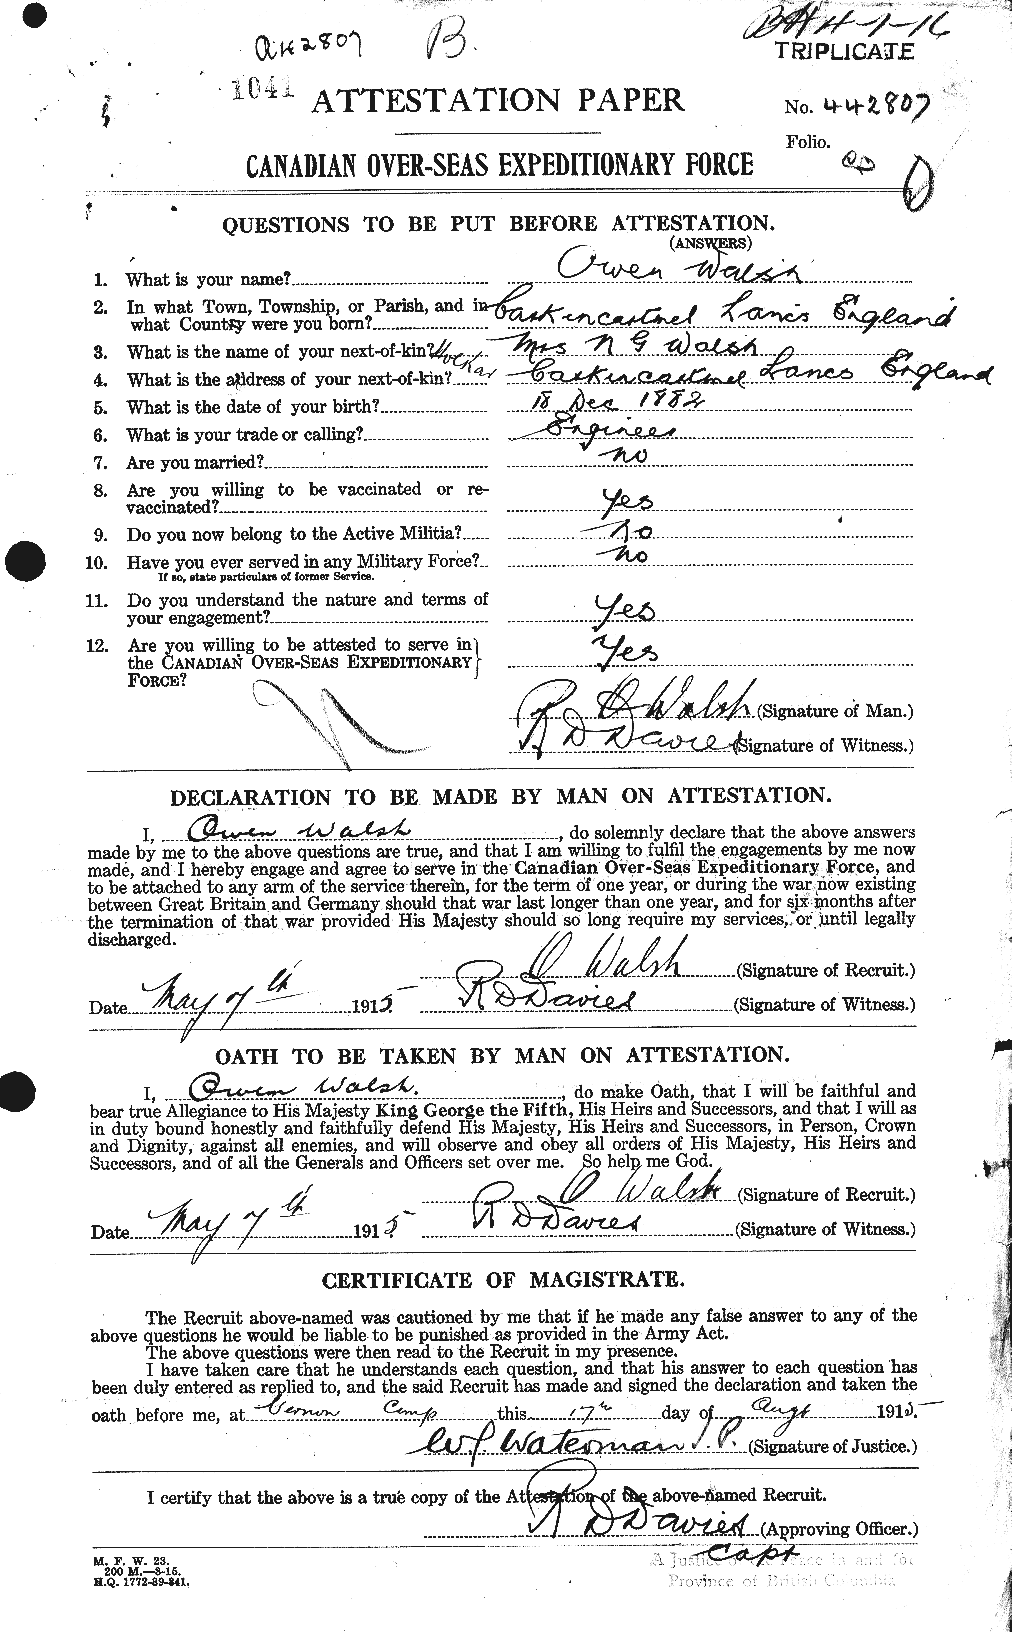 Personnel Records of the First World War - CEF 653454a